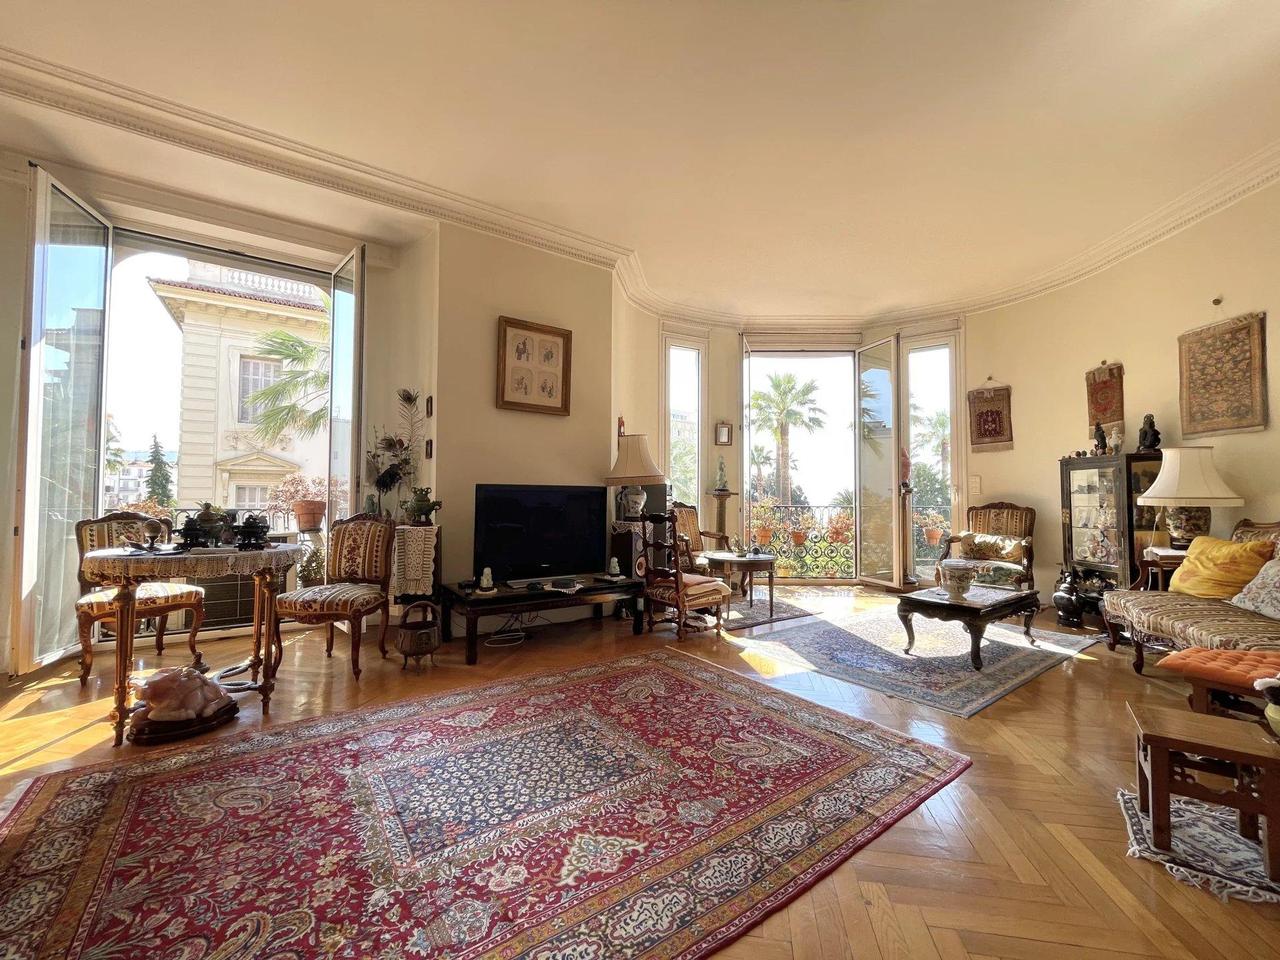 Nice Riviera - Real estate agency Nice Côte d'Azur | Exceptional 4/5 Room Apartment - Exceptional View